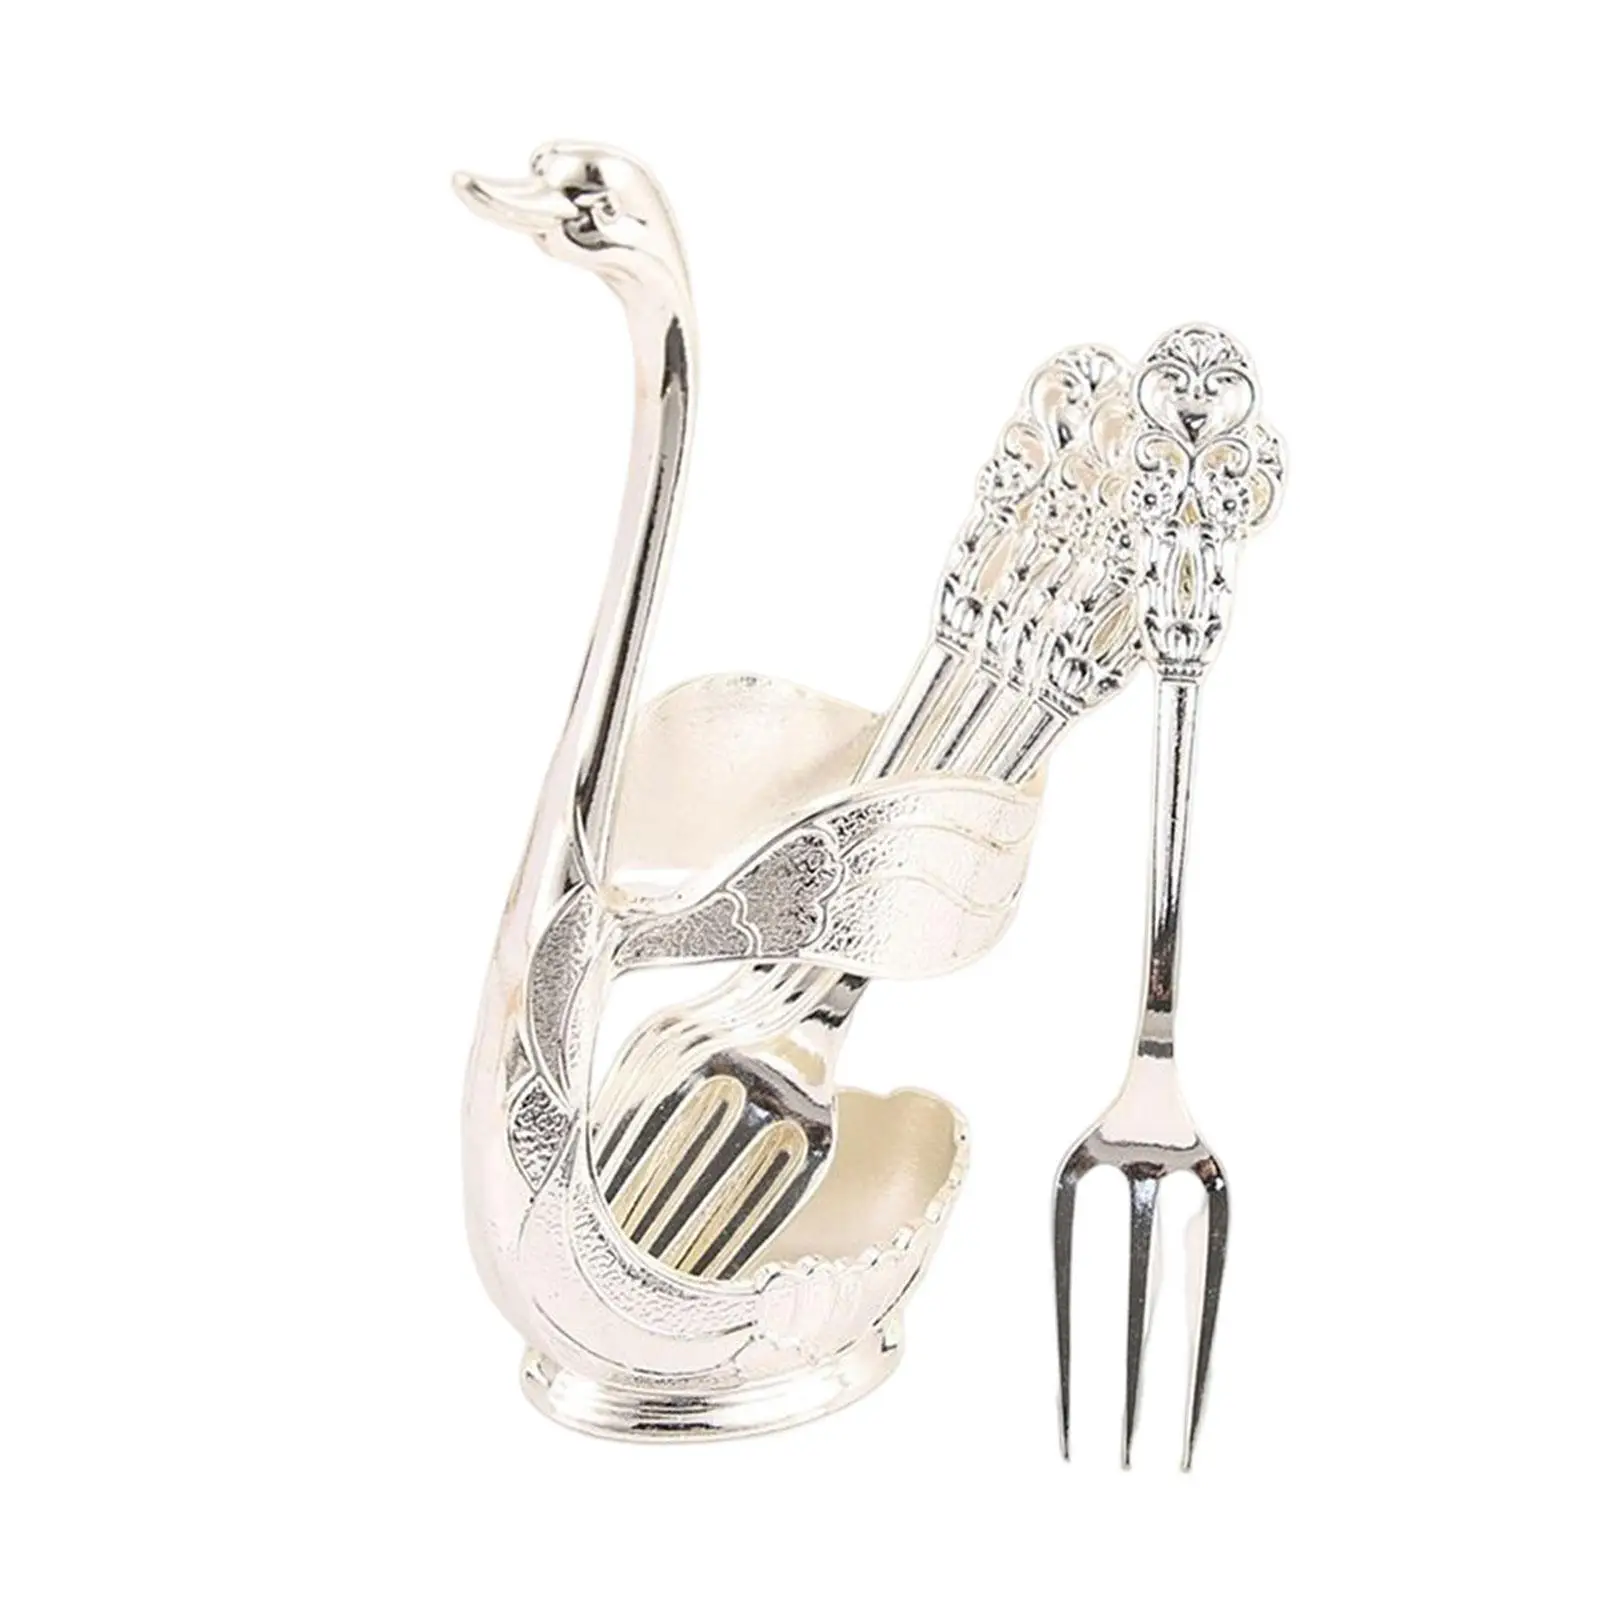 Creative Decorative Swan Base Holder Cutlery Appetizer Forks Teaspoons Coffee Spoons Holder for Restaurant Birthday Party Decor